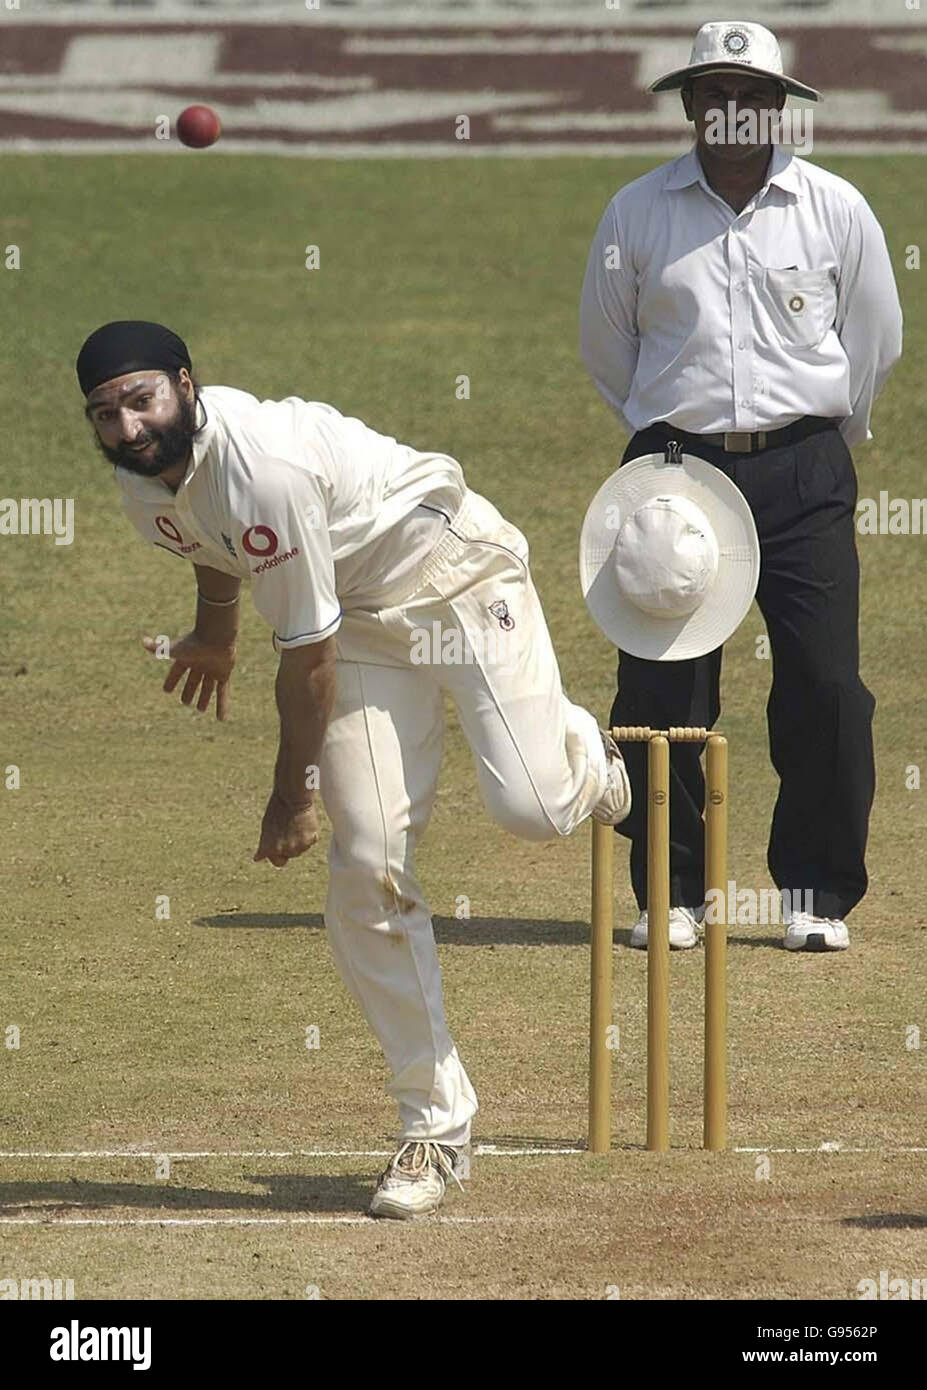 England's Monty Panesar in action during the second day of the match at the Cricket Club of India, Brabourne Stadium, Bombay, India, Sunday February 19 2006. PRESS ASSOCIATION Photo. Photo credit should read: Rebecca Naden/PA Stock Photo